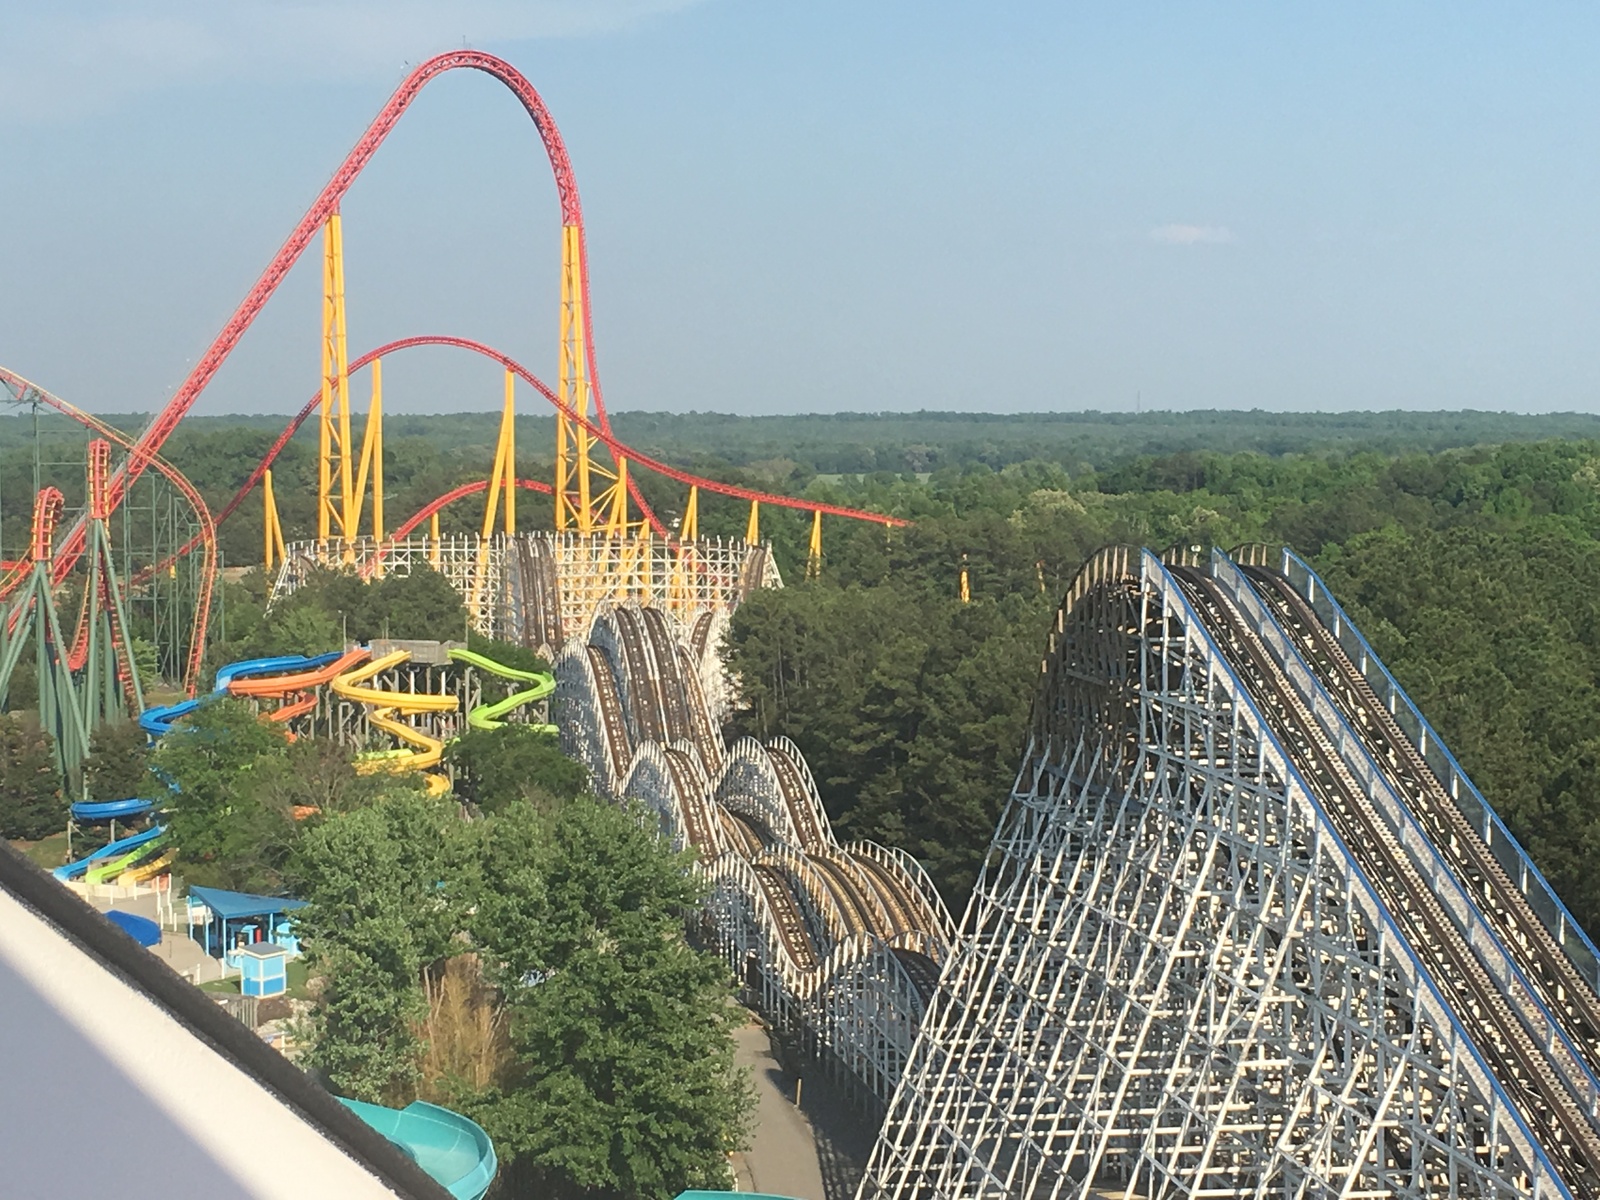 kings-dominion-in-doswell-va-parent-reviews-photos-trekaroo